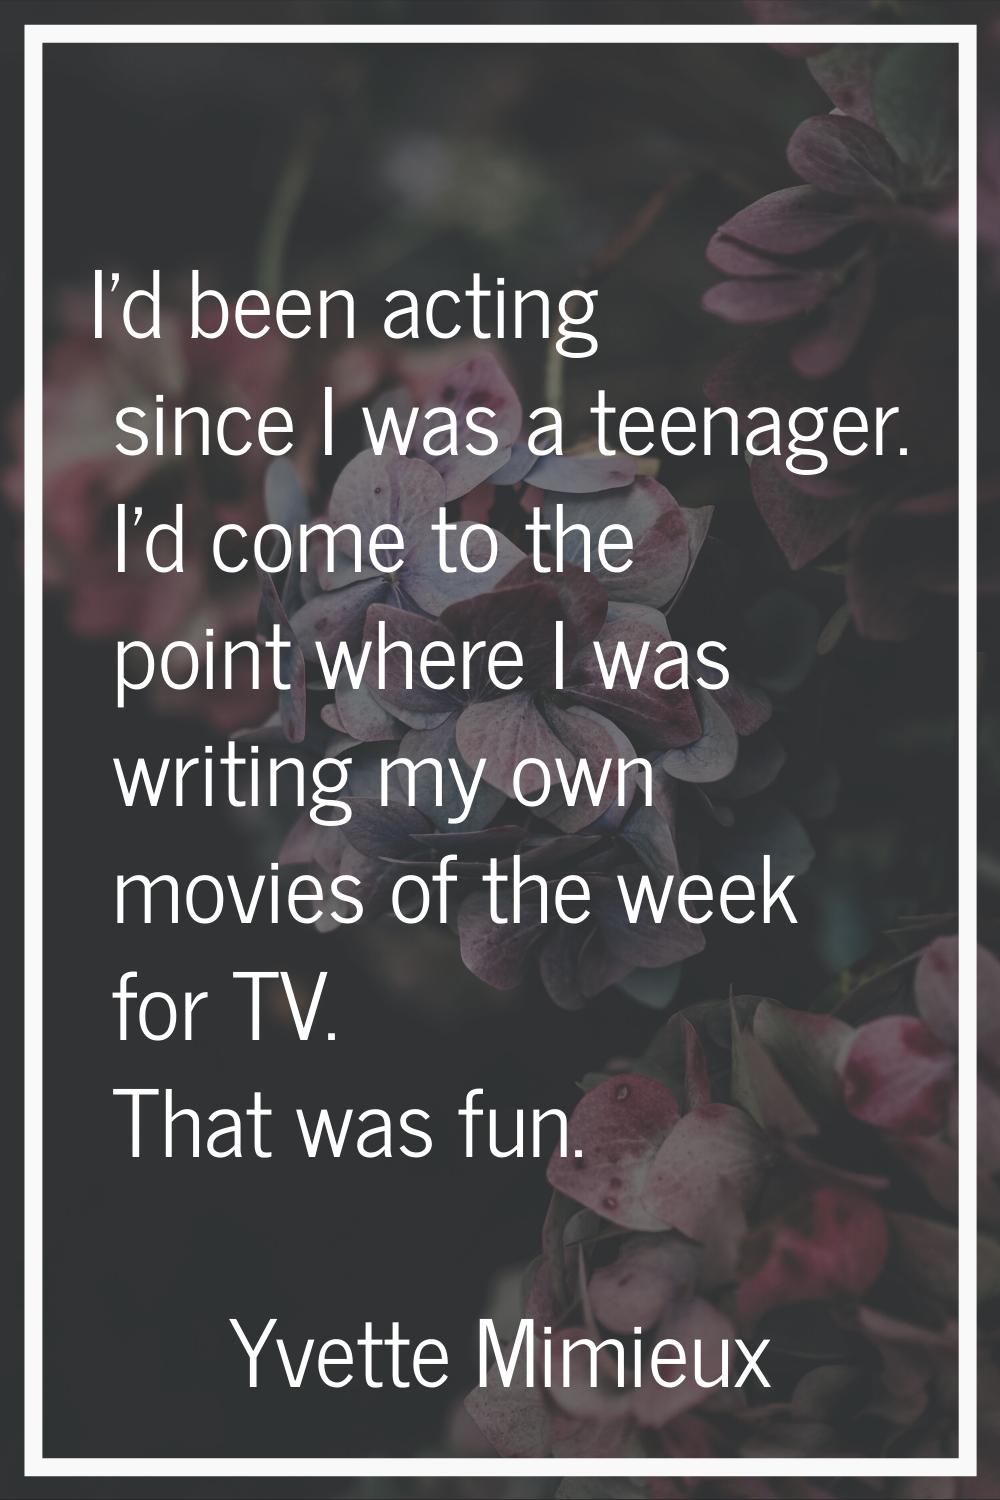 I'd been acting since I was a teenager. I'd come to the point where I was writing my own movies of 